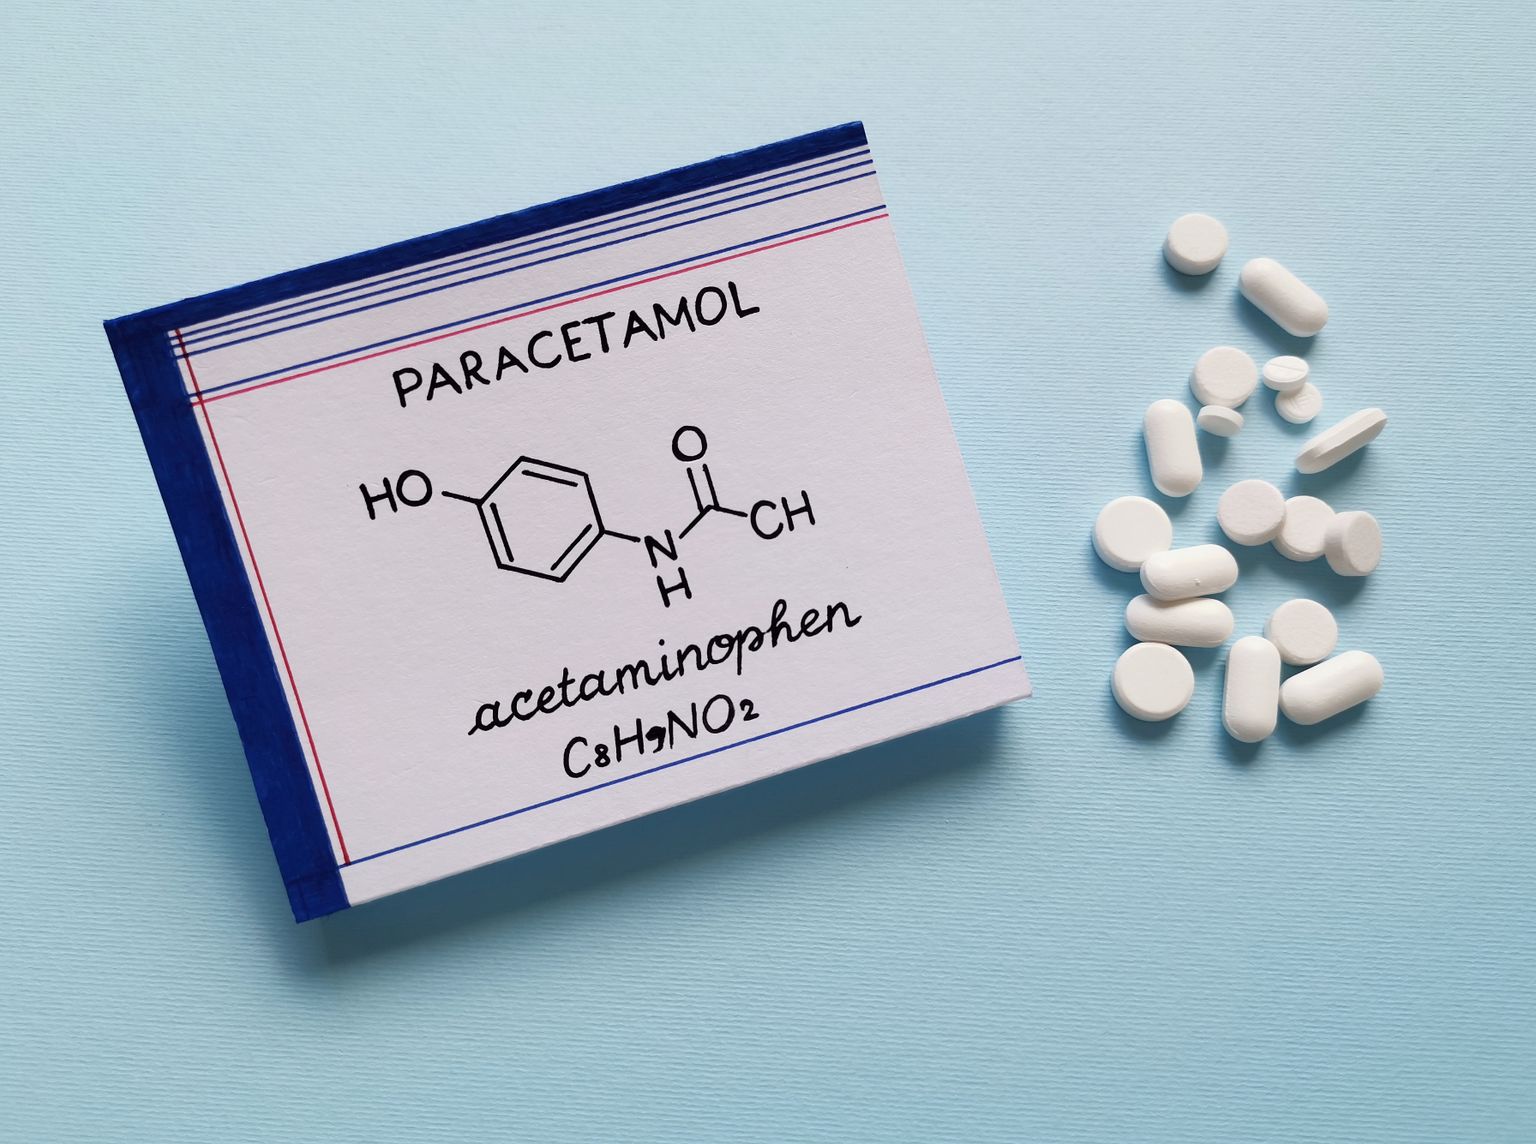 Structural chemical formula of acetaminophen molecule with tablets and tablets in the background. Paracetamol or acetaminophen is a drug used to treat pain and fever and is a mild analgesic.